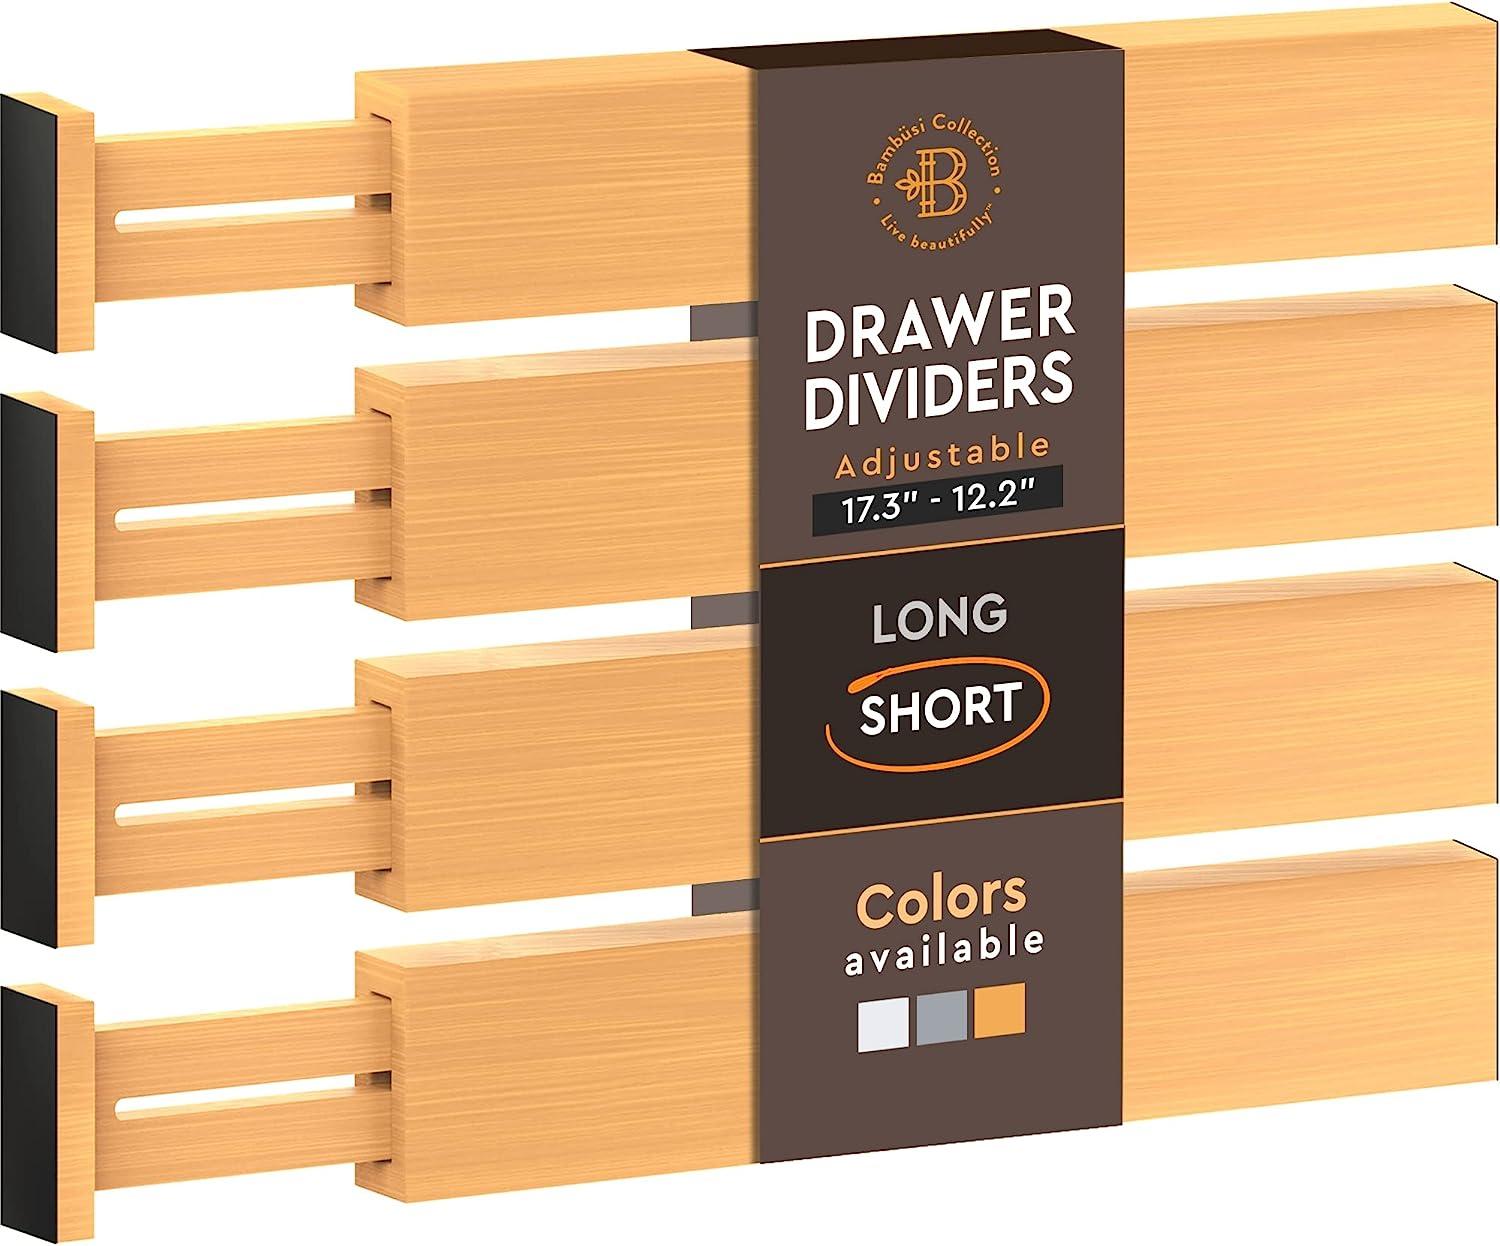 adjustable bamboo drawer dividers organizers - fits standard drawers sized 12 2